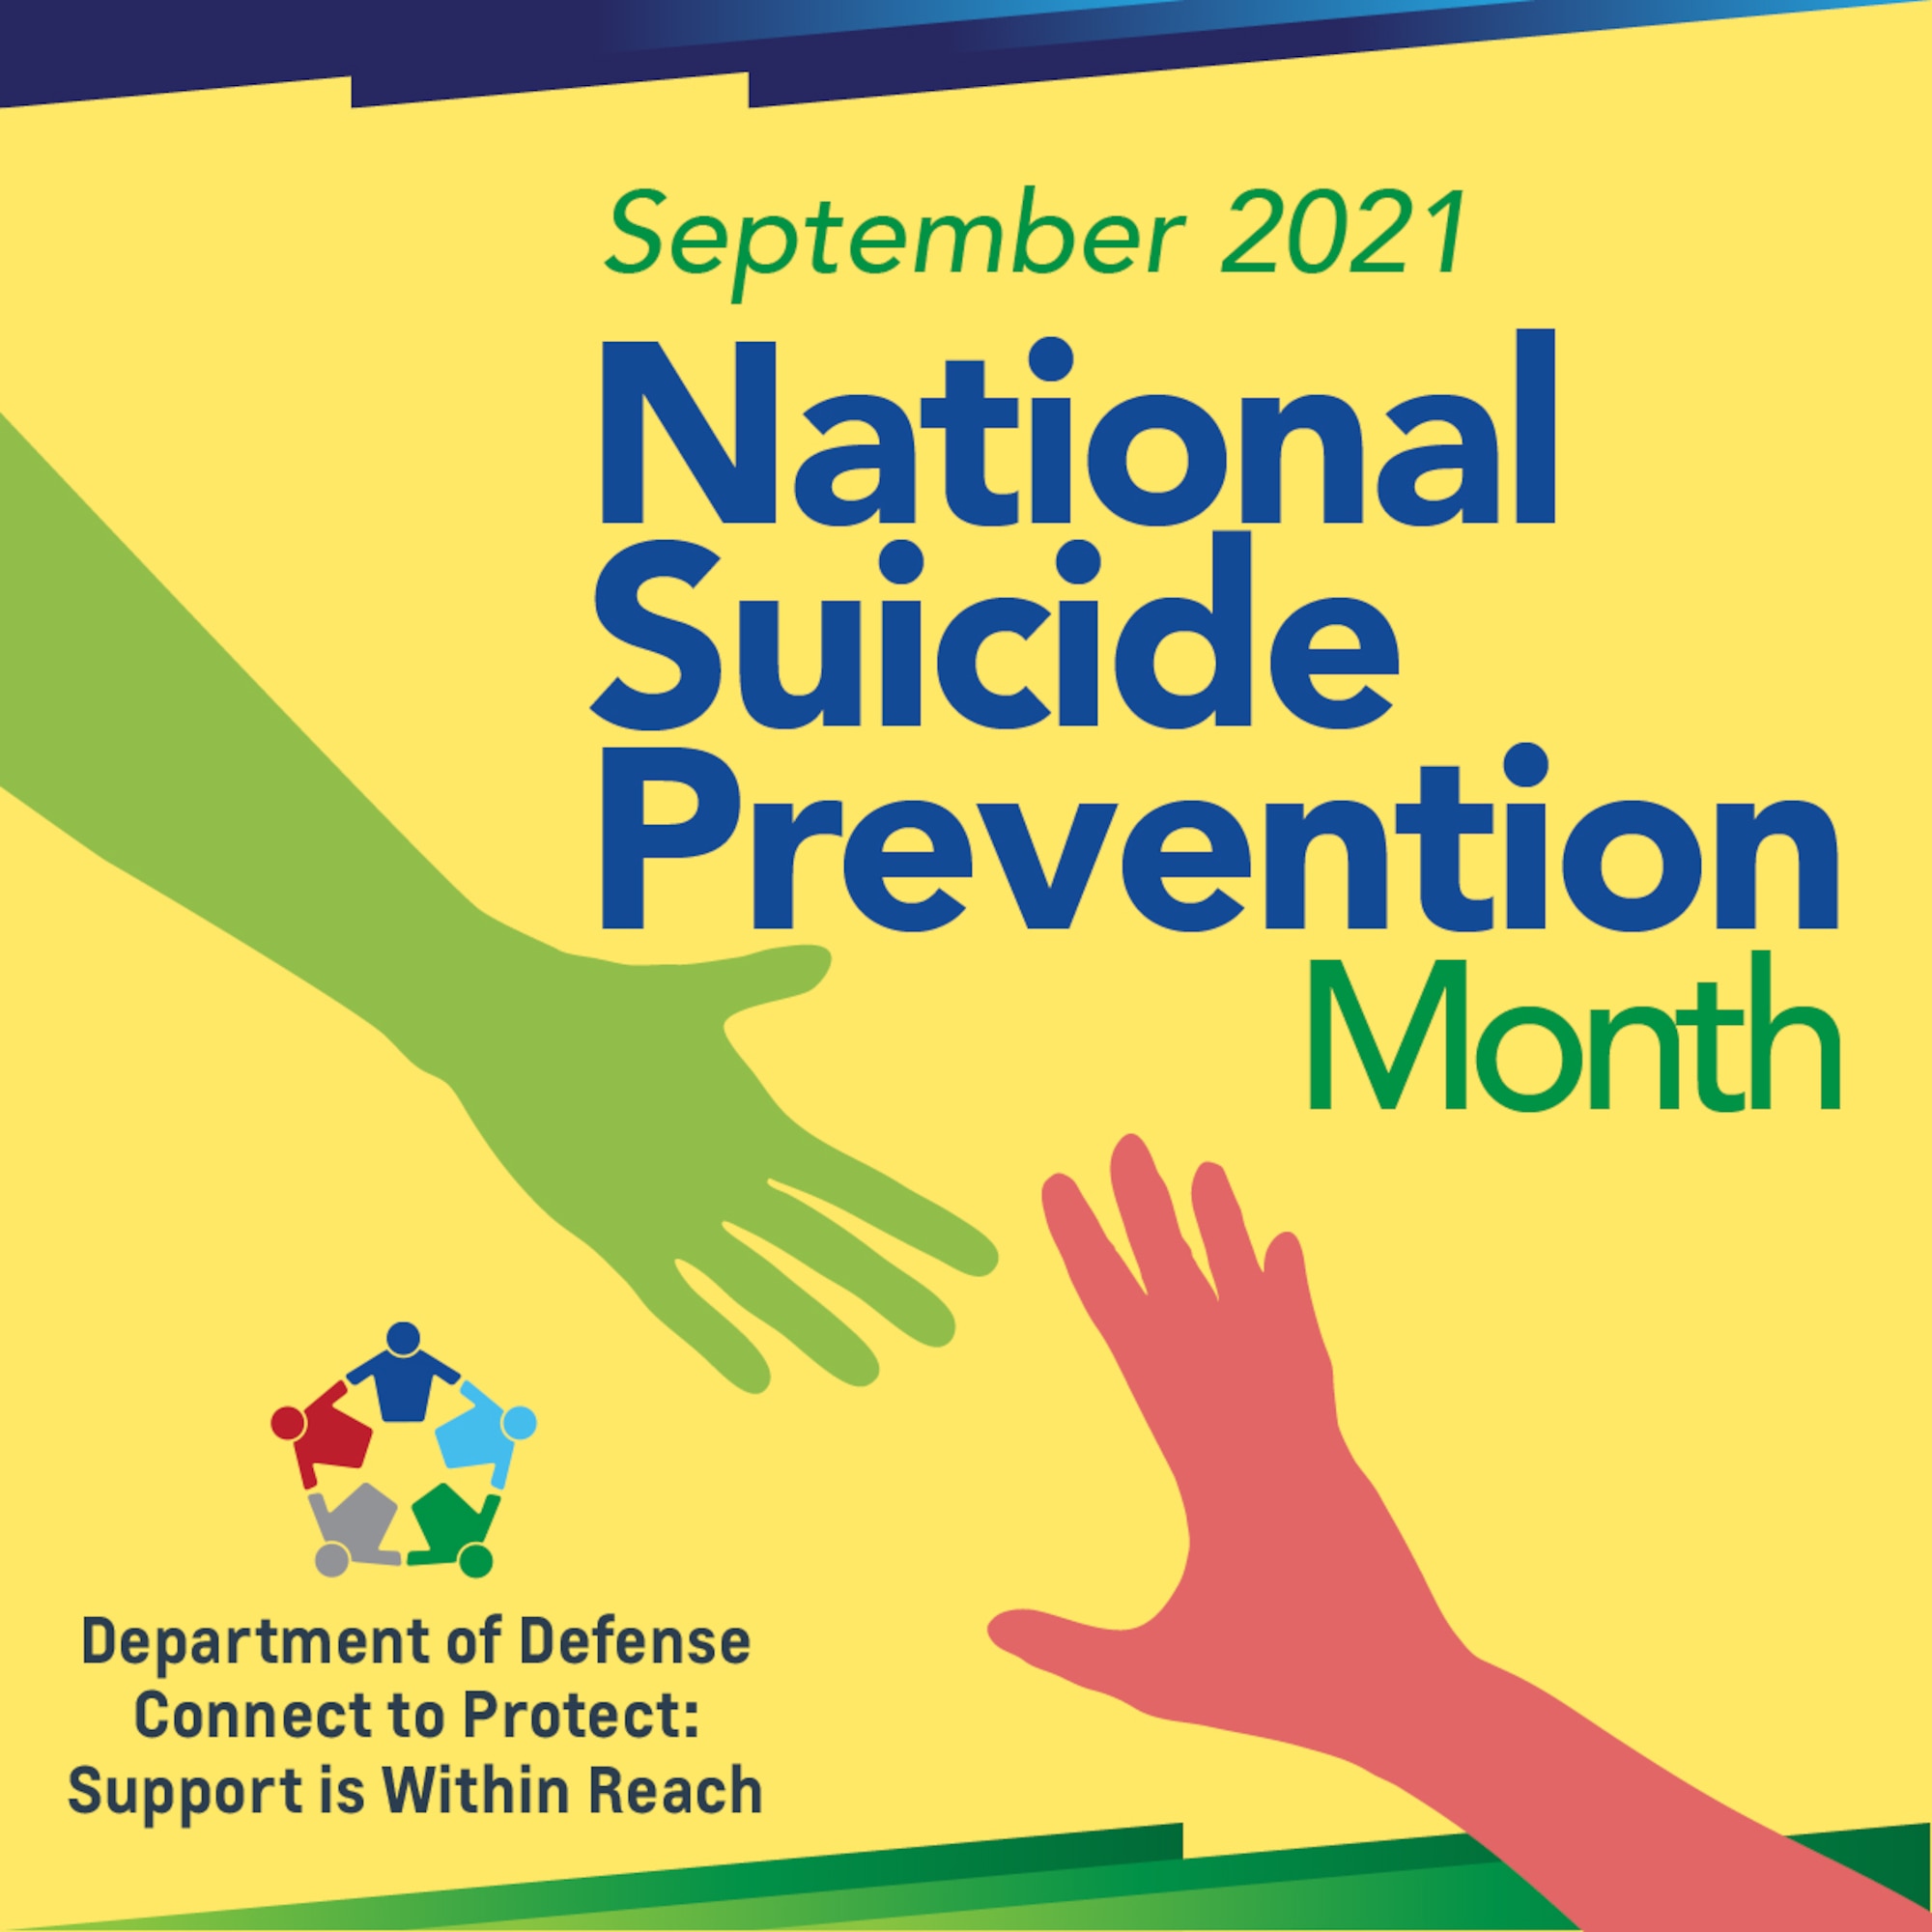 Hands reaching out to help prevent suicide